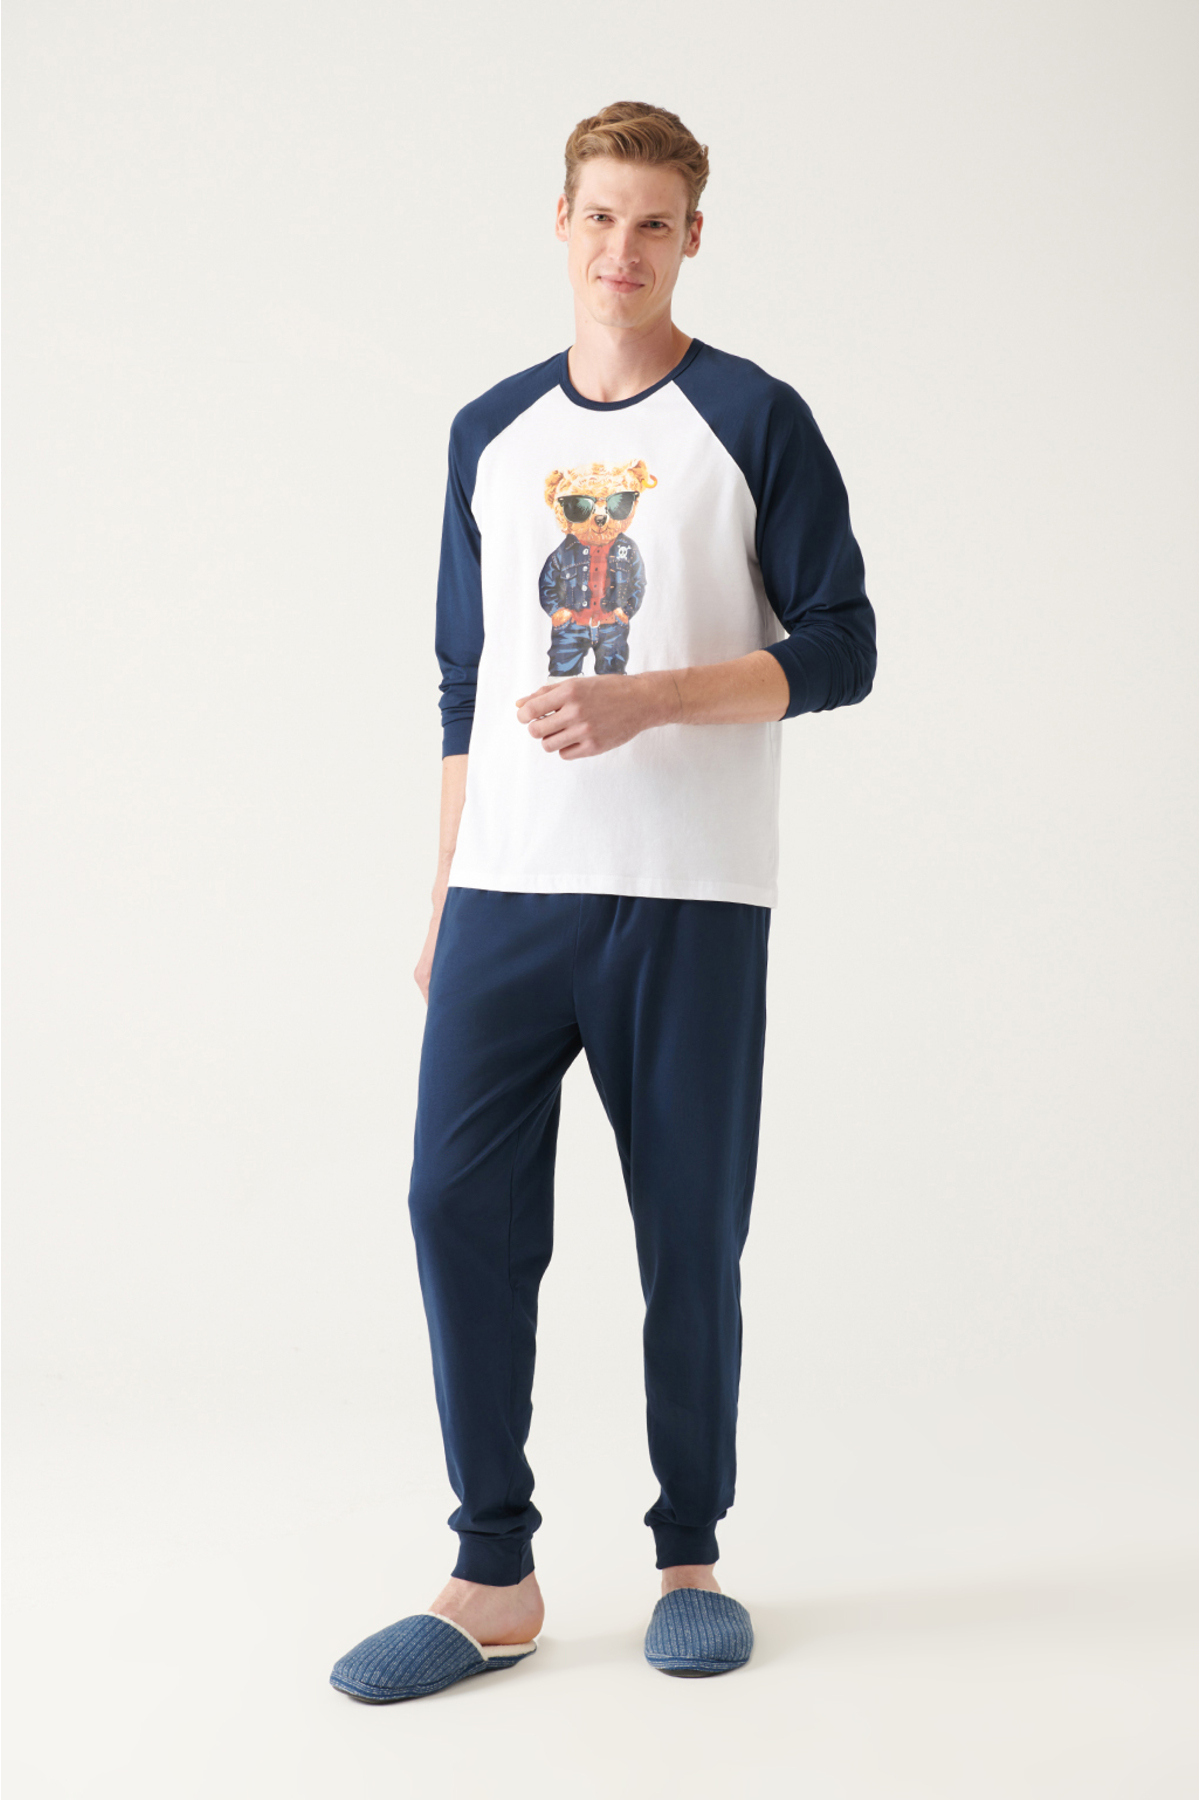 Levně Avva Men's Navy Blue Crew Neck 100% Cotton With Special Boxes, Long Sleeves and Printed Pajamas Set